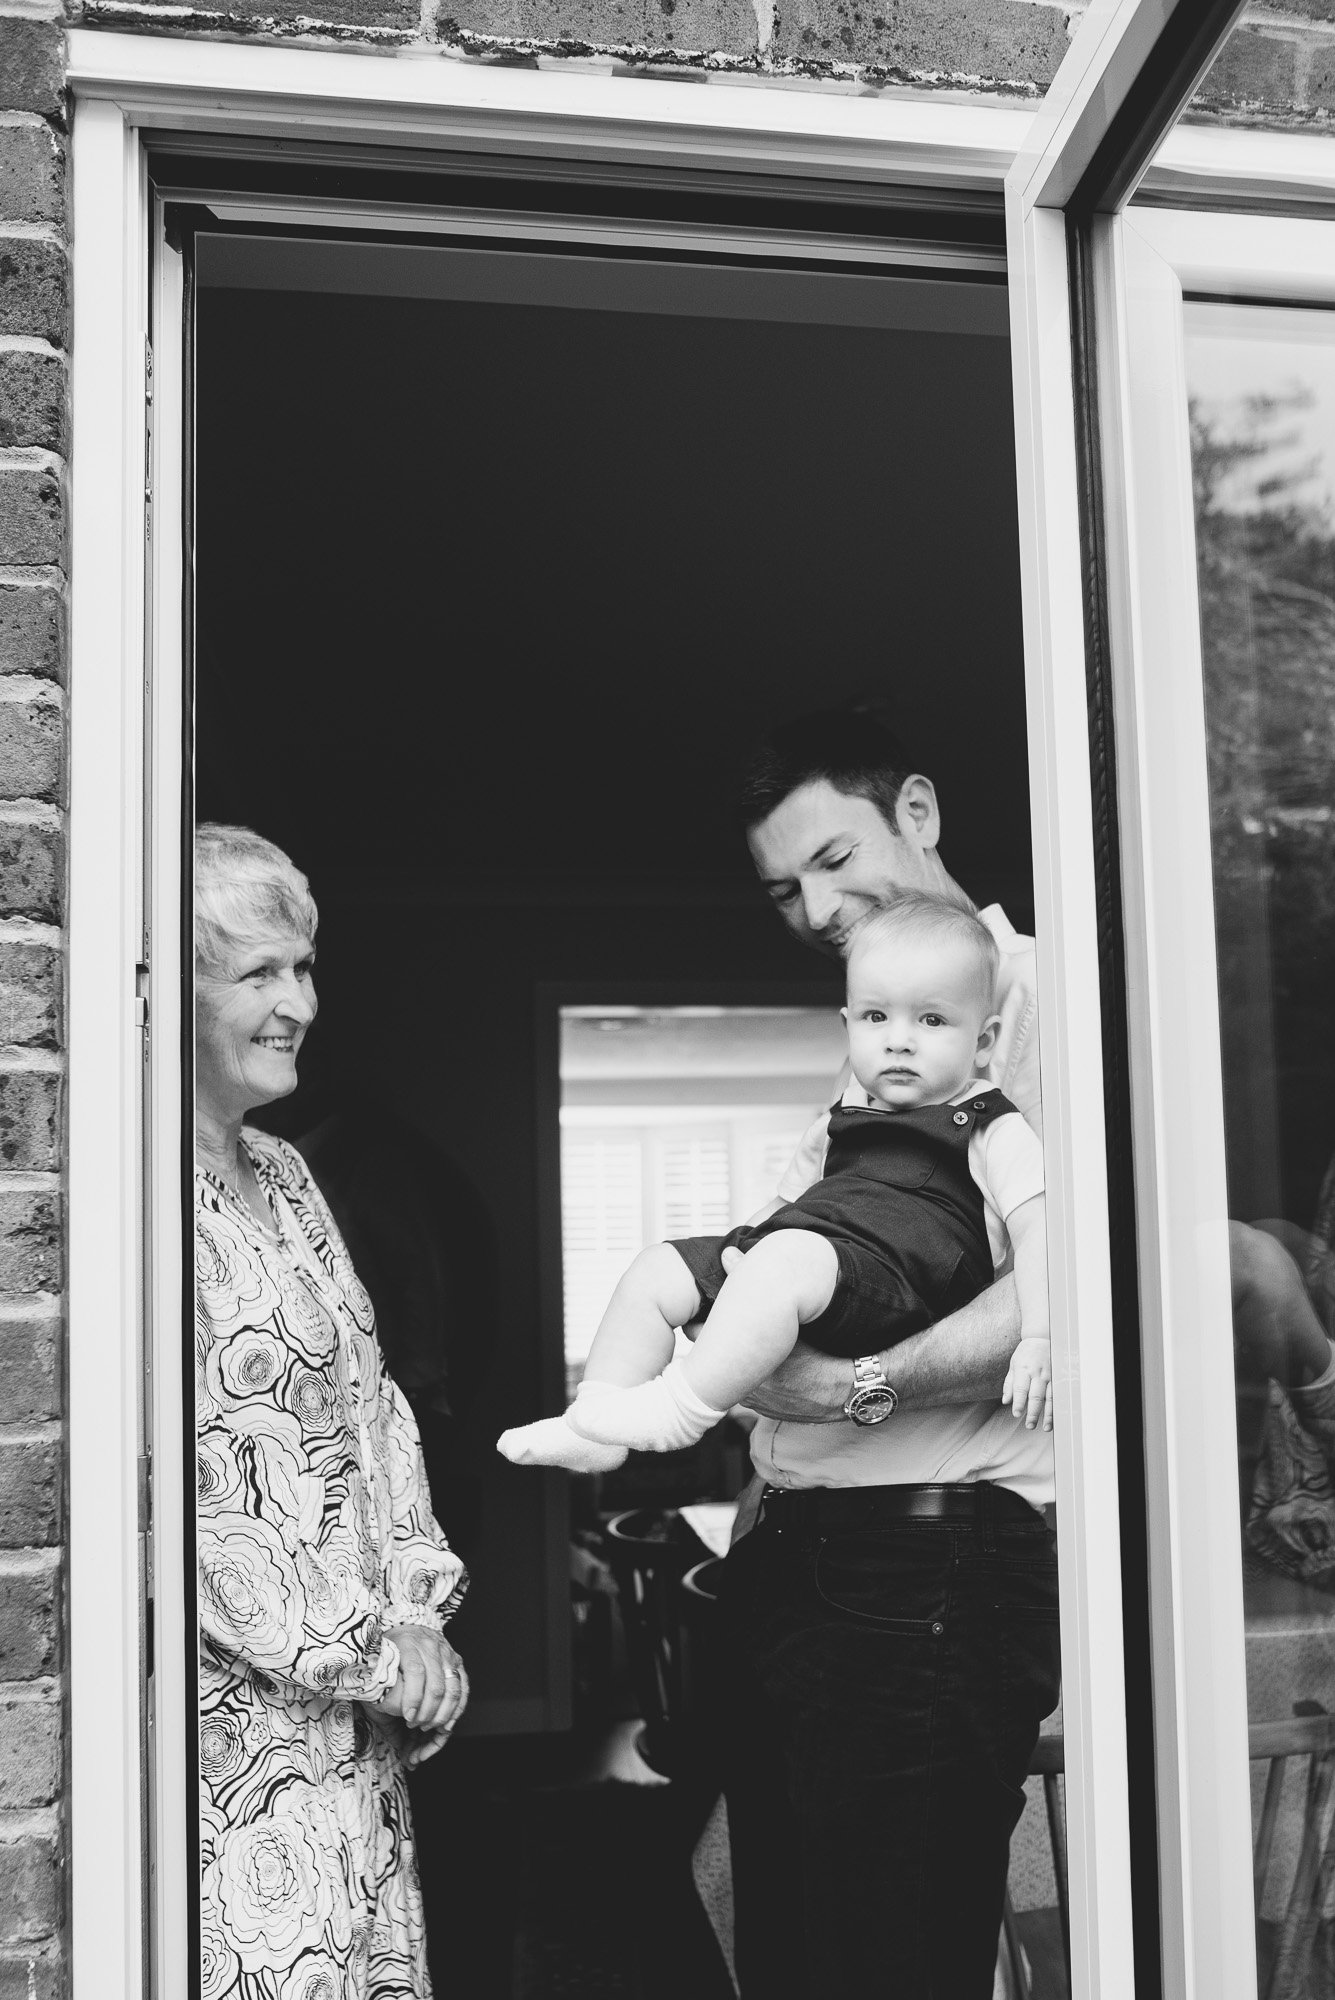 dad-baby-boy-at-home-with-aunt-family-photoshoot-before-christening-starts-natural-black-and-white-children-photography.jpg